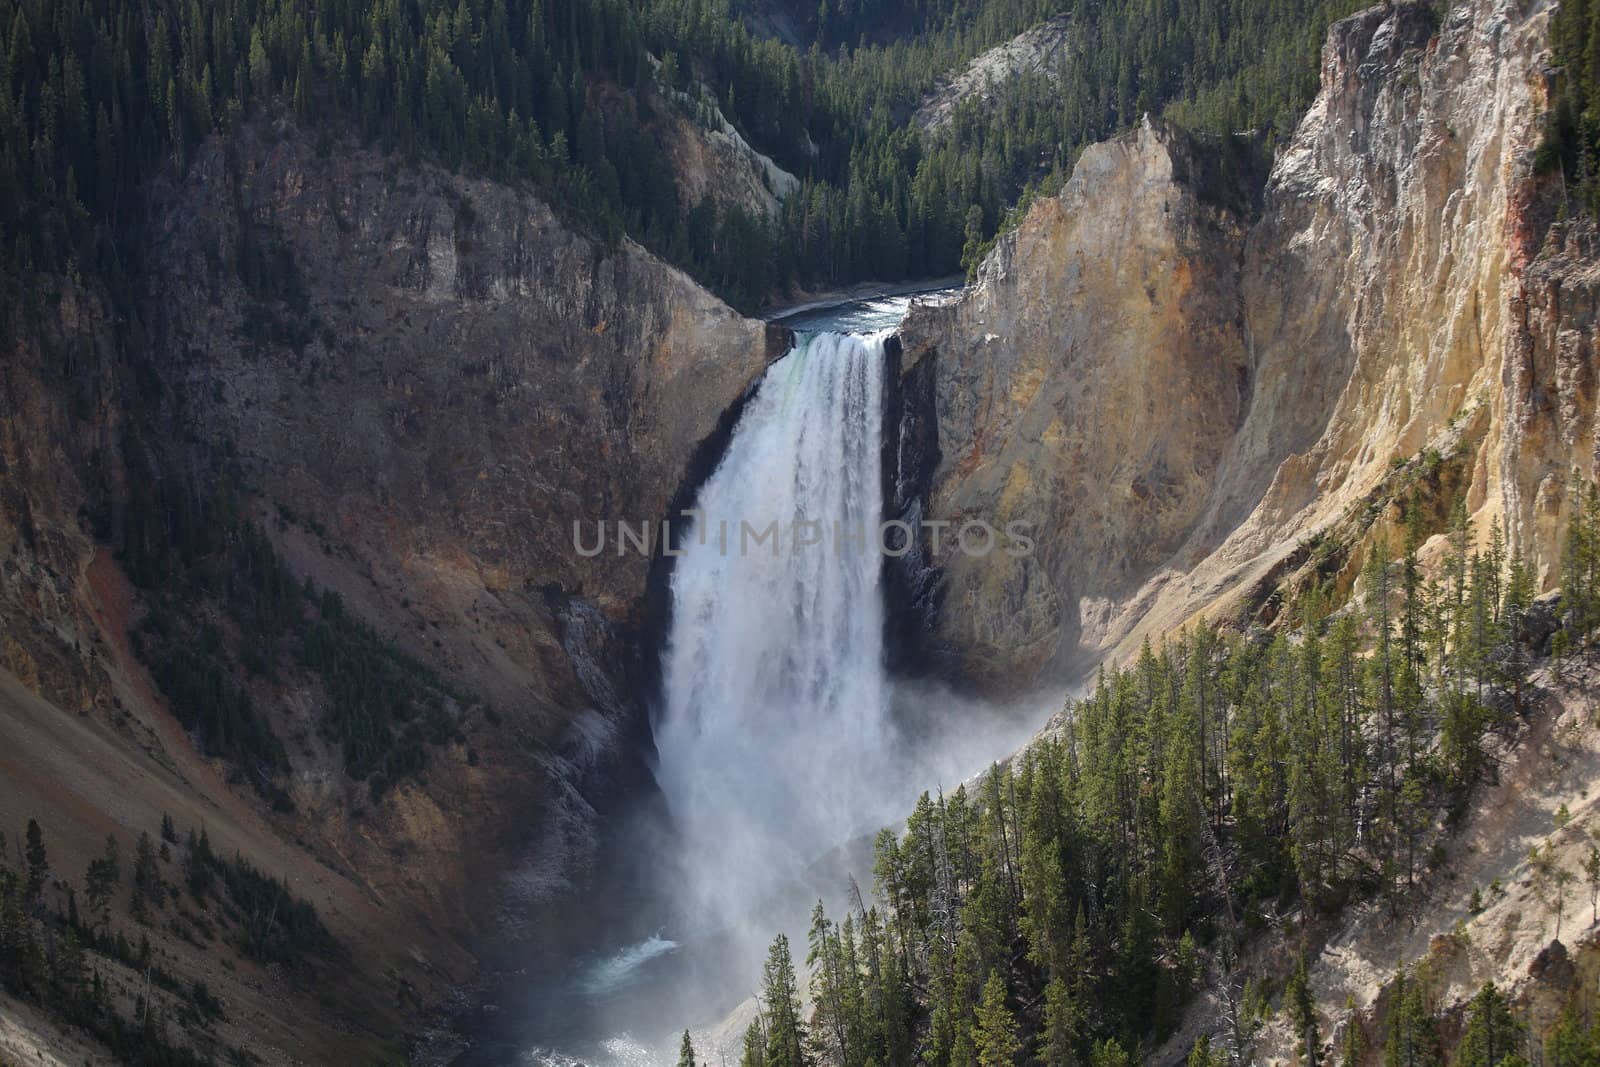 Yellowstone National Park - Lower Falls by Ffooter